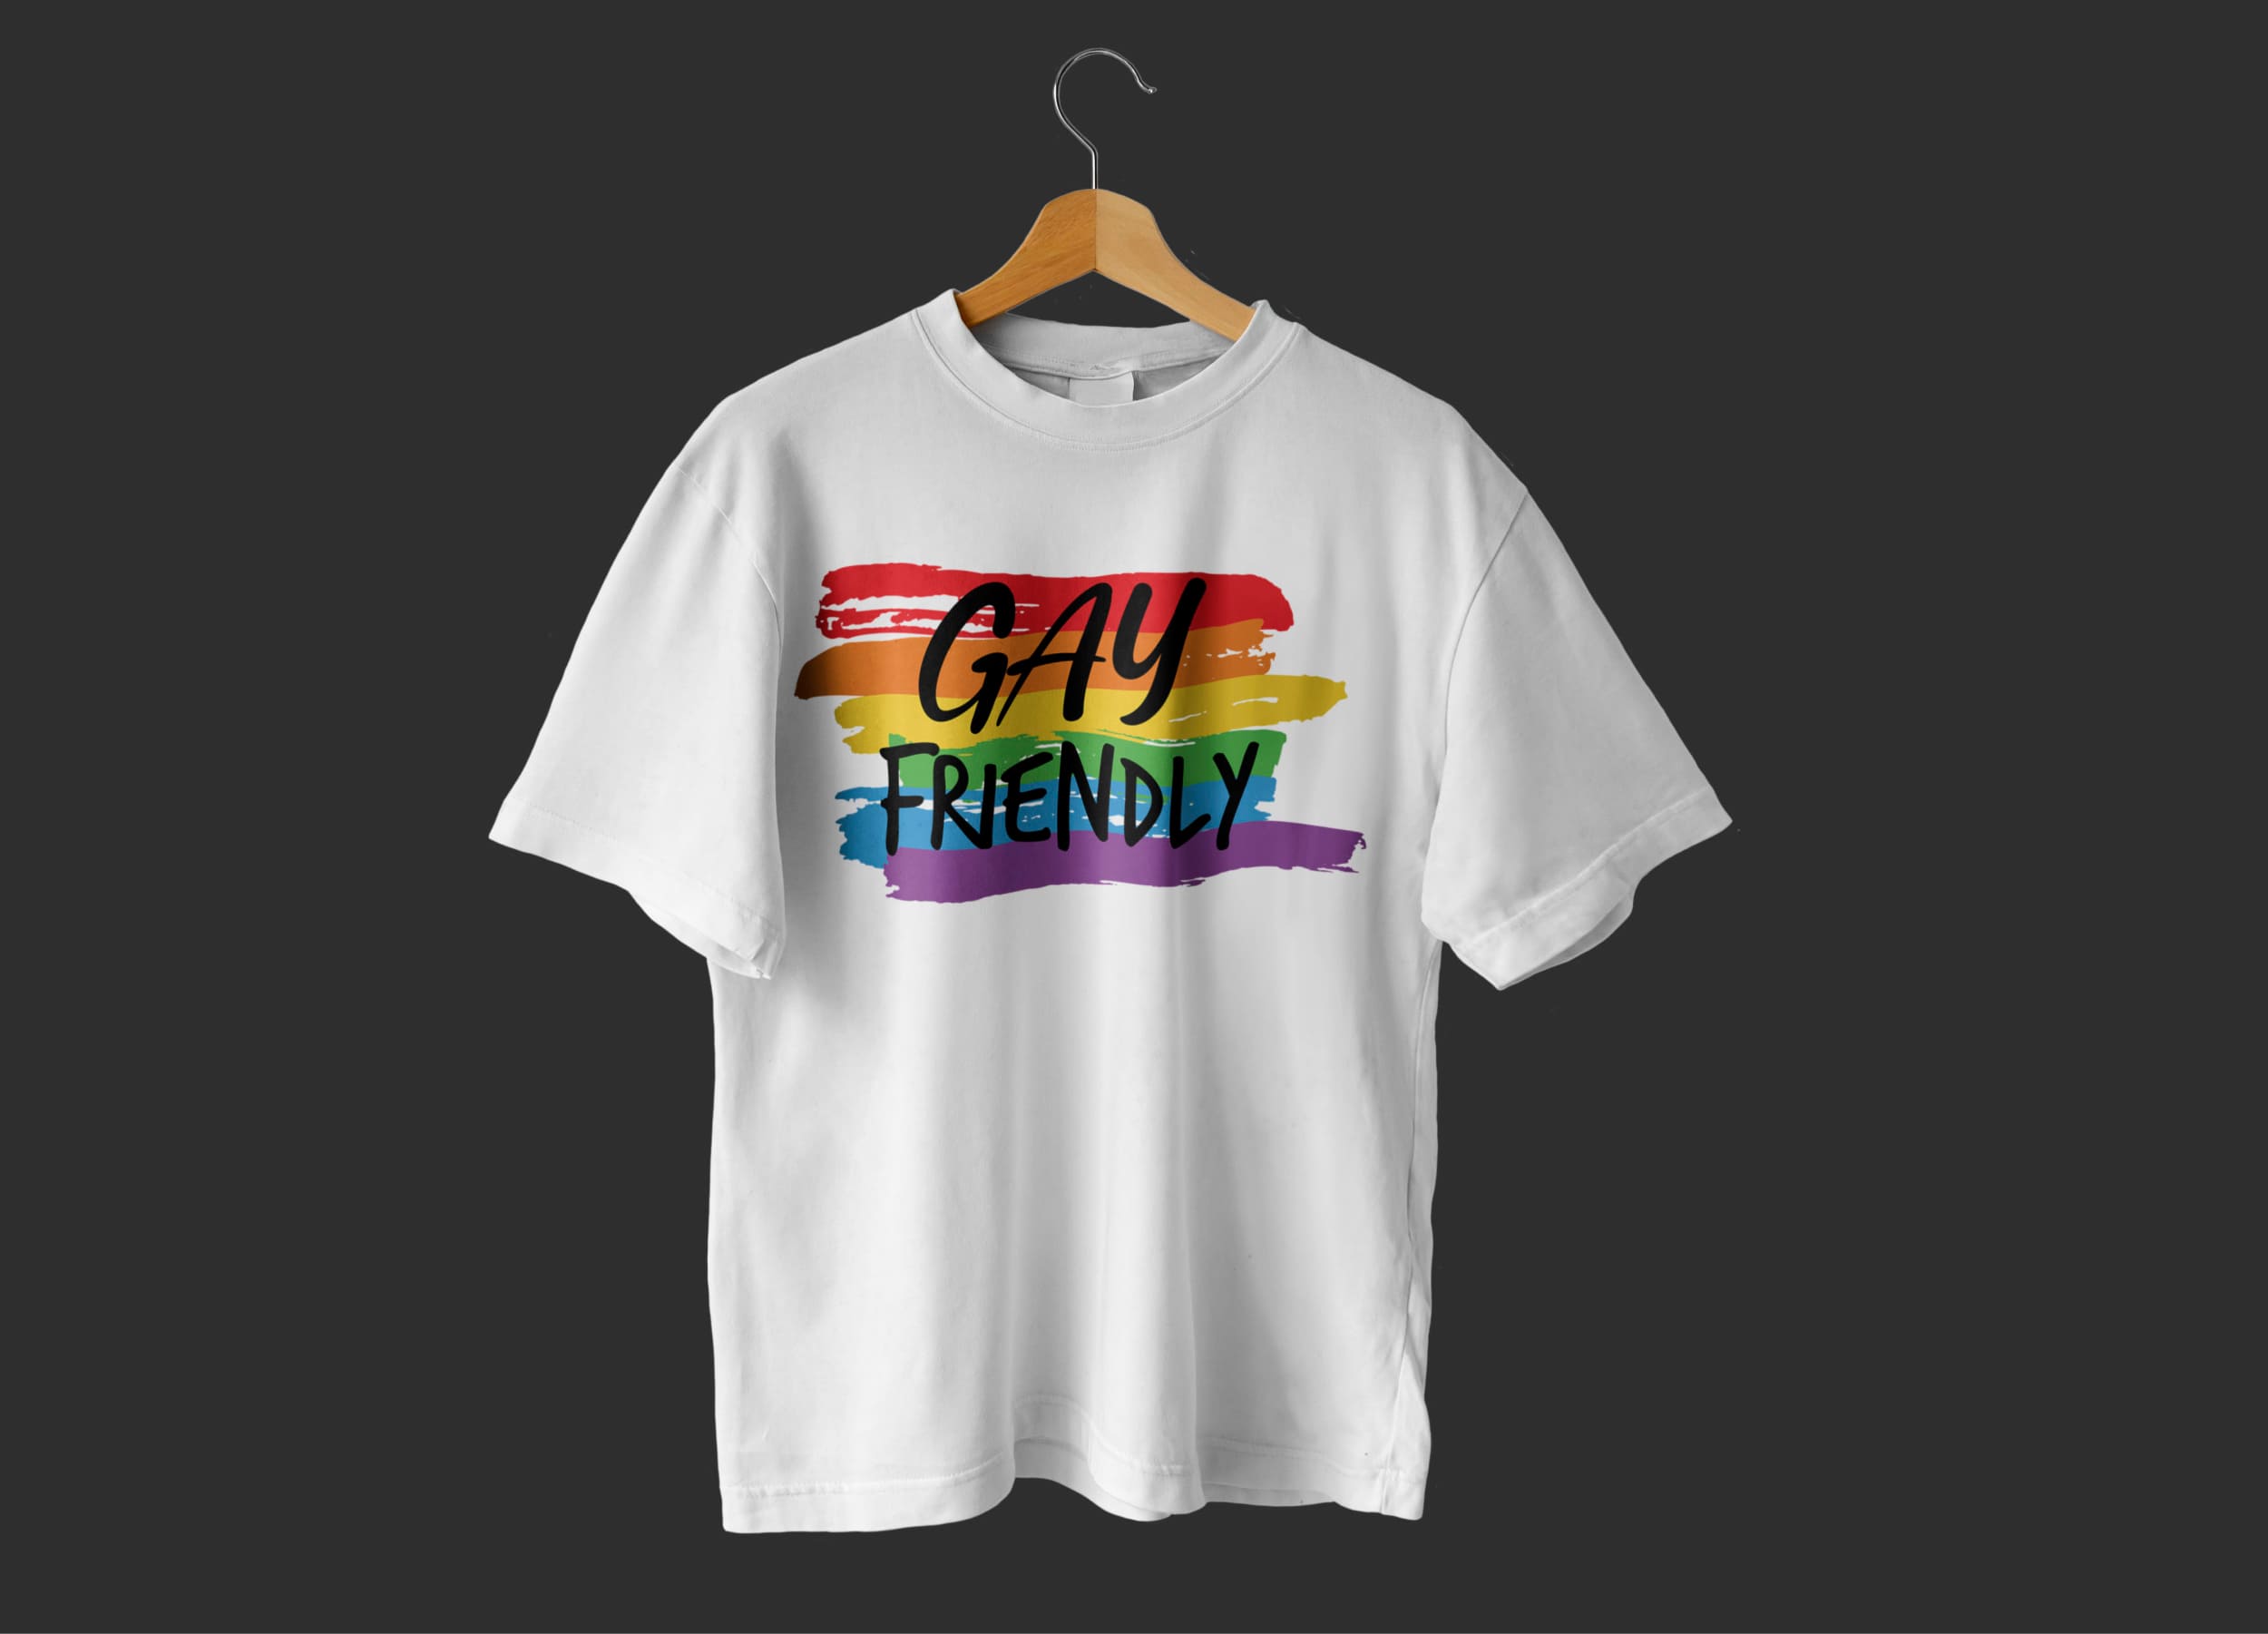 A white t-shirt with the black lettering "Be proud" against an LGBT flag on a hanger and on a dark gray background.